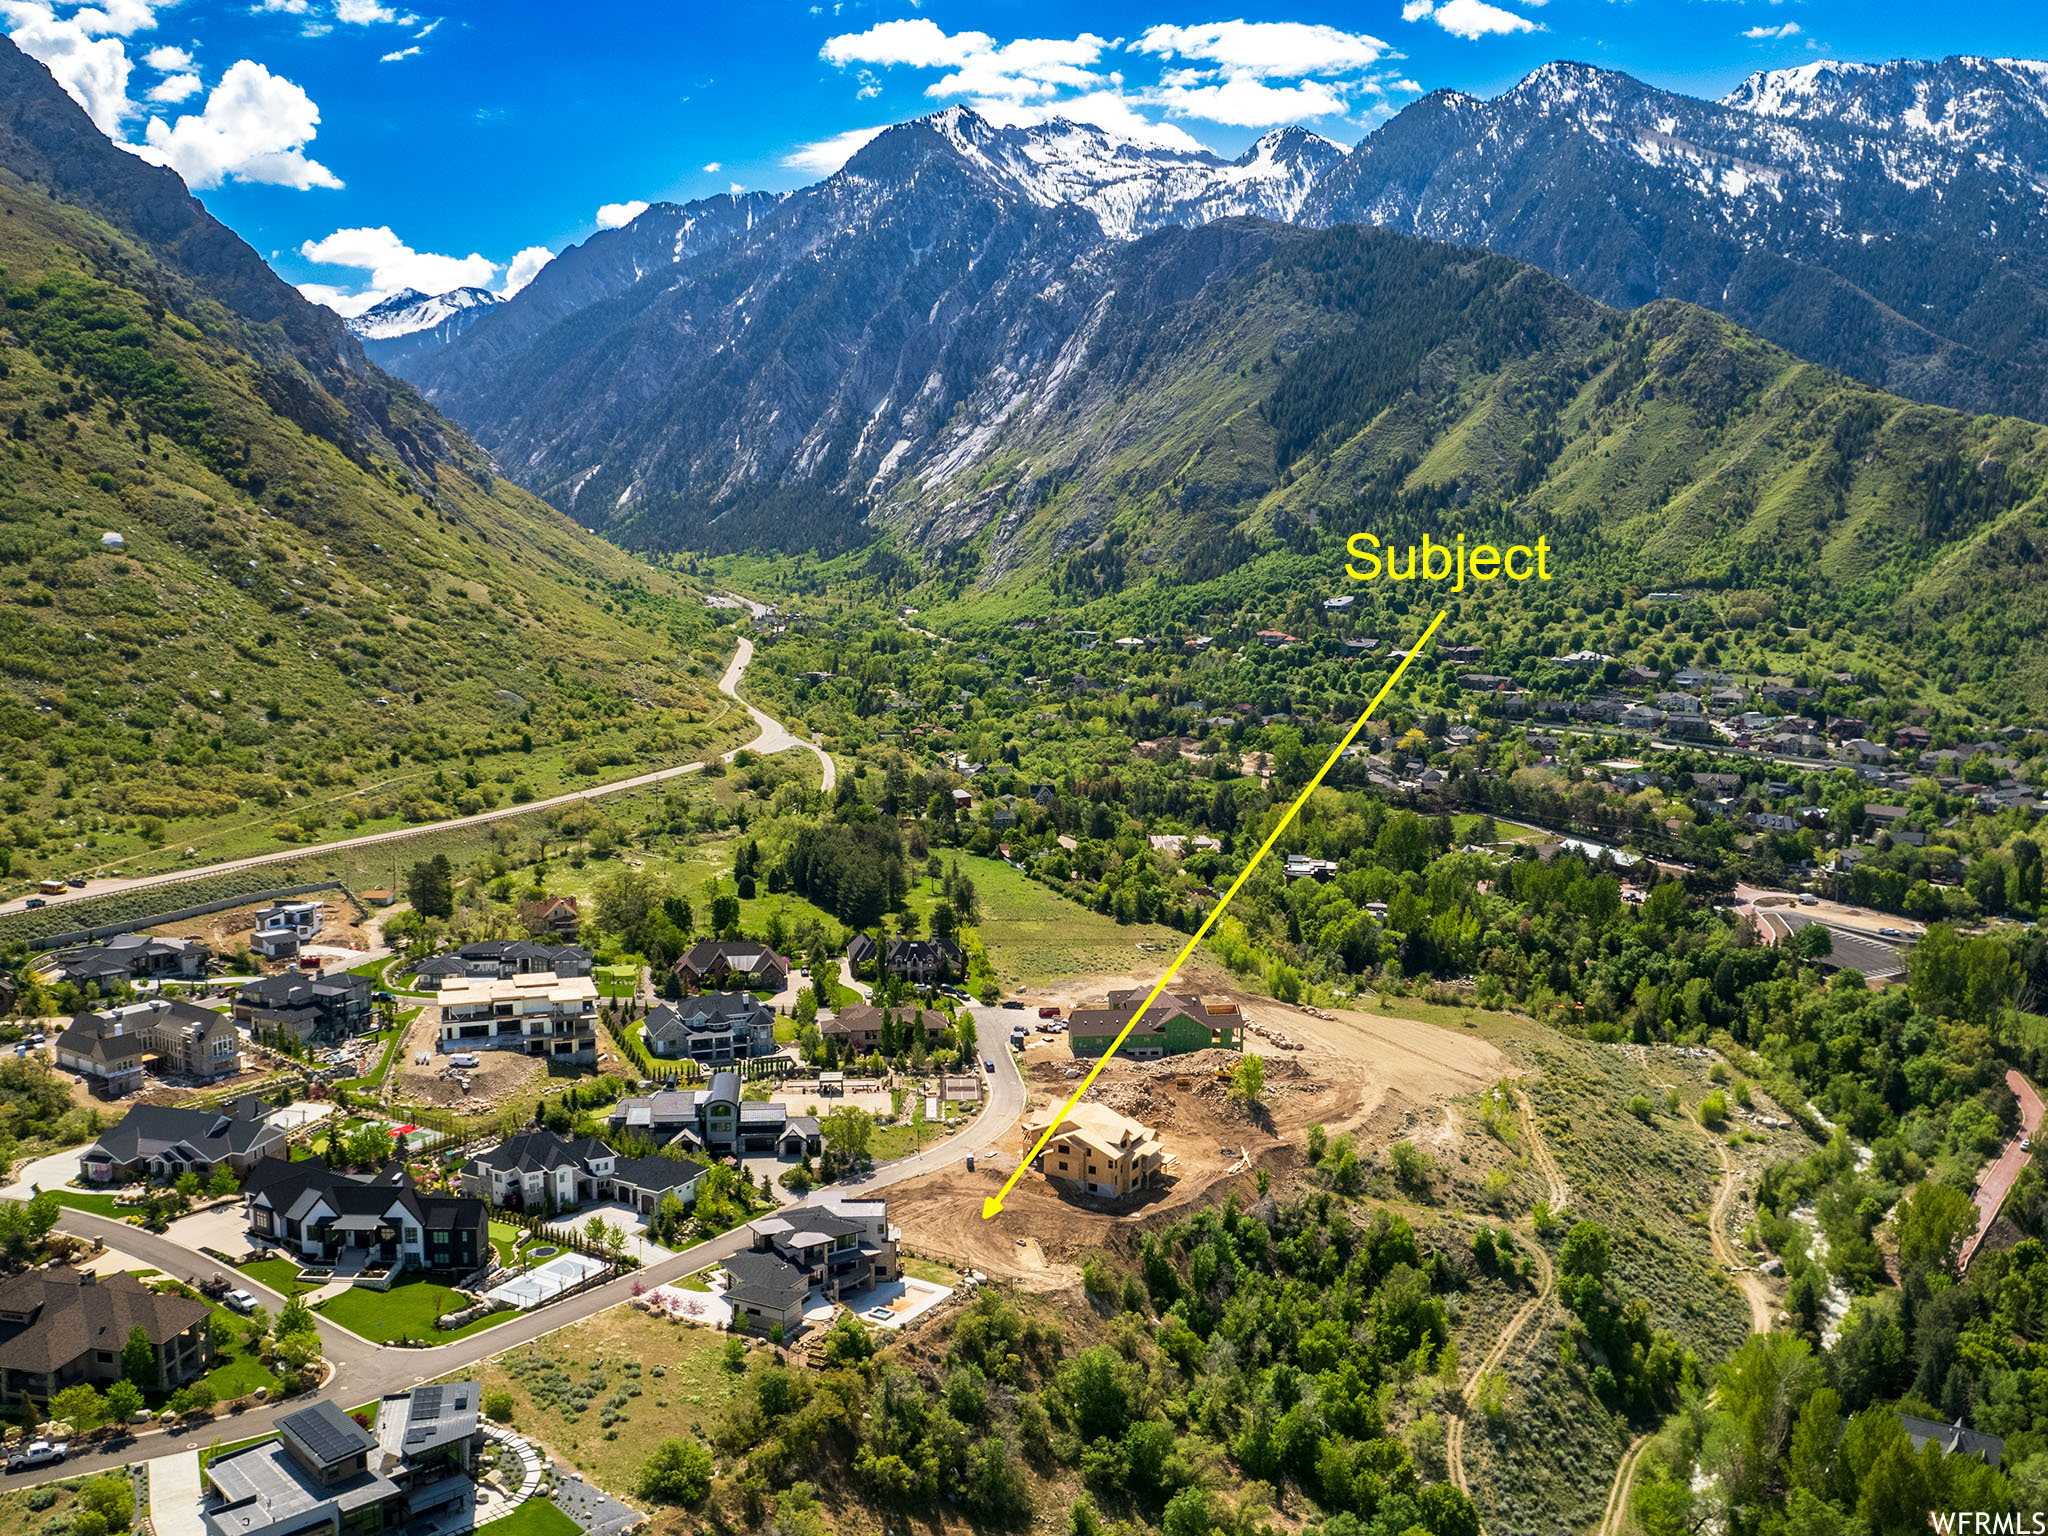 BEAUTIFUL AREA AND LOT 391 IS THE SUBJECT LOT HIGHLIGHTED BY THE ARROW.